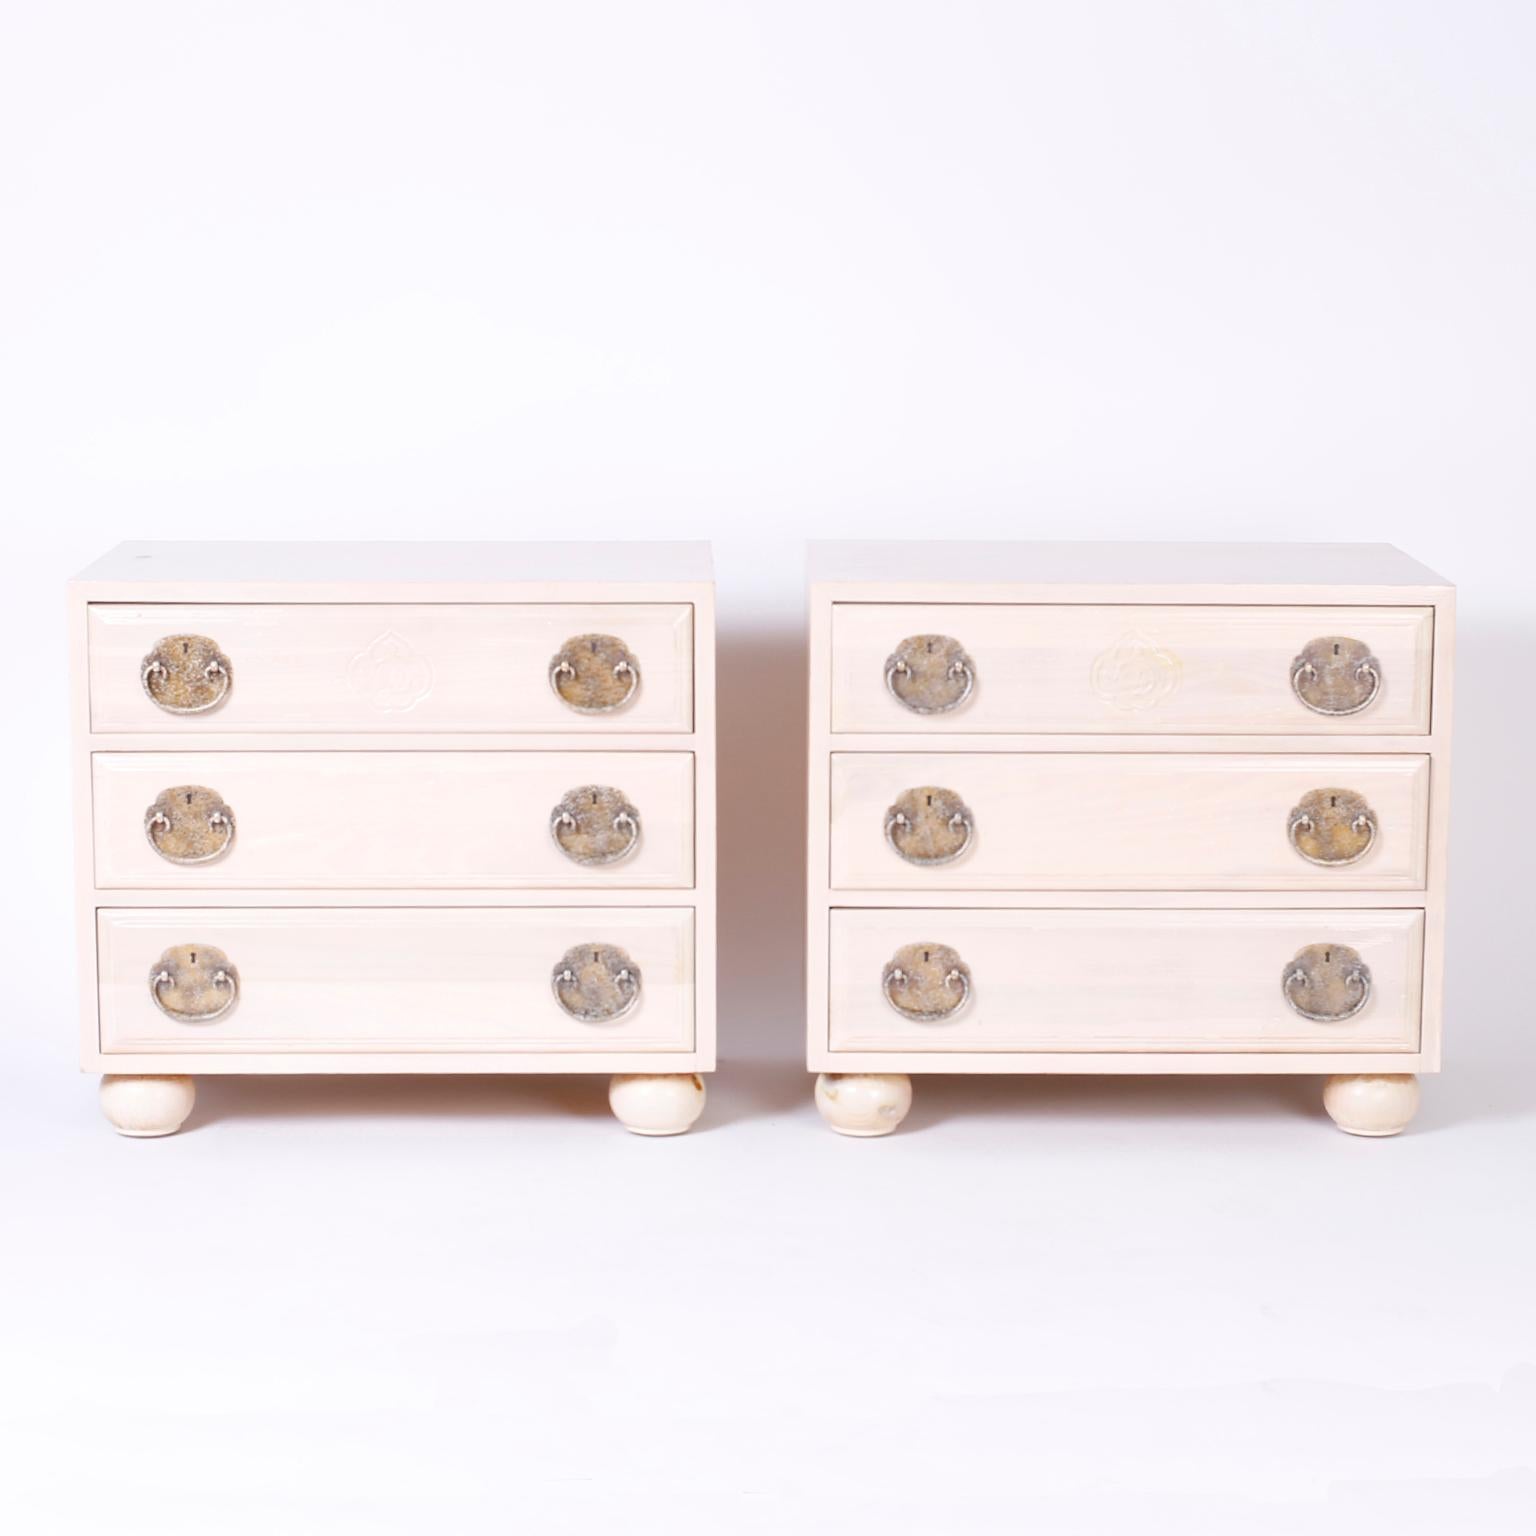 Vogue pair of midcentury three-drawer night stands or chests with an unusual pickled pine finish, sleek Asian Modern form, speckled brass Ming style hardware, and proper bun feet.